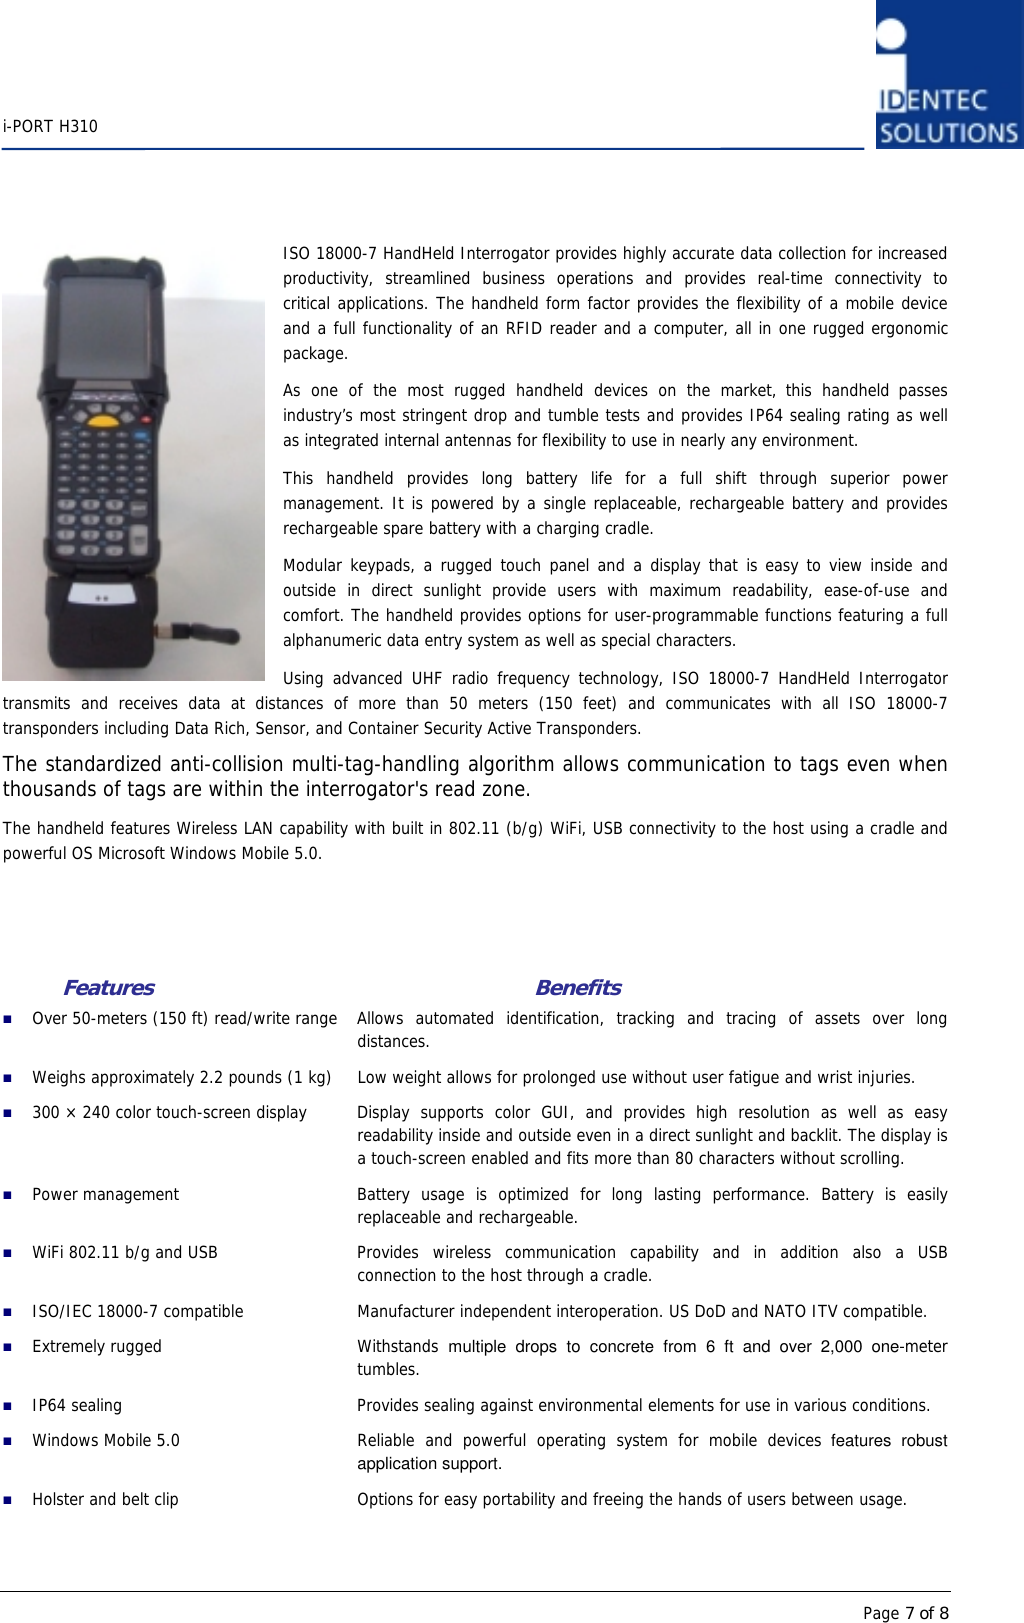    i-PORT H310      Page 7 of 8ISO 18000-7 HandHeld Interrogator provides highly accurate data collection for increased productivity, streamlined business operations and provides real-time connectivity to critical applications. The handheld form factor provides the flexibility of a mobile device and a full functionality of an RFID reader and a computer, all in one rugged ergonomic package.  As one of the most rugged handheld devices on the market, this handheld passes industry’s most stringent drop and tumble tests and provides IP64 sealing rating as well as integrated internal antennas for flexibility to use in nearly any environment. This handheld provides long battery life for a full shift through superior power management. It is powered by a single replaceable, rechargeable battery and provides rechargeable spare battery with a charging cradle.  Modular keypads, a rugged touch panel and a display that is easy to view inside and outside in direct sunlight provide users with maximum readability, ease-of-use and comfort. The handheld provides options for user-programmable functions featuring a full alphanumeric data entry system as well as special characters. Using advanced UHF radio frequency technology, ISO 18000-7 HandHeld Interrogator transmits and receives data at distances of more than 50 meters (150 feet) and communicates with all ISO 18000-7 transponders including Data Rich, Sensor, and Container Security Active Transponders. The standardized anti-collision multi-tag-handling algorithm allows communication to tags even when thousands of tags are within the interrogator&apos;s read zone. The handheld features Wireless LAN capability with built in 802.11 (b/g) WiFi, USB connectivity to the host using a cradle and powerful OS Microsoft Windows Mobile 5.0.     Features       Benefits  Over 50-meters (150 ft) read/write range  Allows automated identification, tracking and tracing of assets over long distances.  Weighs approximately 2.2 pounds (1 kg)  Low weight allows for prolonged use without user fatigue and wrist injuries.  300 × 240 color touch-screen display  Display supports color GUI, and provides high resolution as well as easy readability inside and outside even in a direct sunlight and backlit. The display is a touch-screen enabled and fits more than 80 characters without scrolling.  Power management  Battery usage is optimized for long lasting performance. Battery is easily replaceable and rechargeable.  WiFi 802.11 b/g and USB  Provides  wireless  communication  capability and in addition also a USB connection to the host through a cradle.  ISO/IEC 18000-7 compatible  Manufacturer independent interoperation. US DoD and NATO ITV compatible.  Extremely rugged  Withstands  multiple drops to concrete from 6 ft and over 2,000 one-meter tumbles.   IP64 sealing  Provides sealing against environmental elements for use in various conditions.  Windows Mobile 5.0  Reliable and powerful operating system for mobile devices features robust application support.  Holster and belt clip  Options for easy portability and freeing the hands of users between usage. 